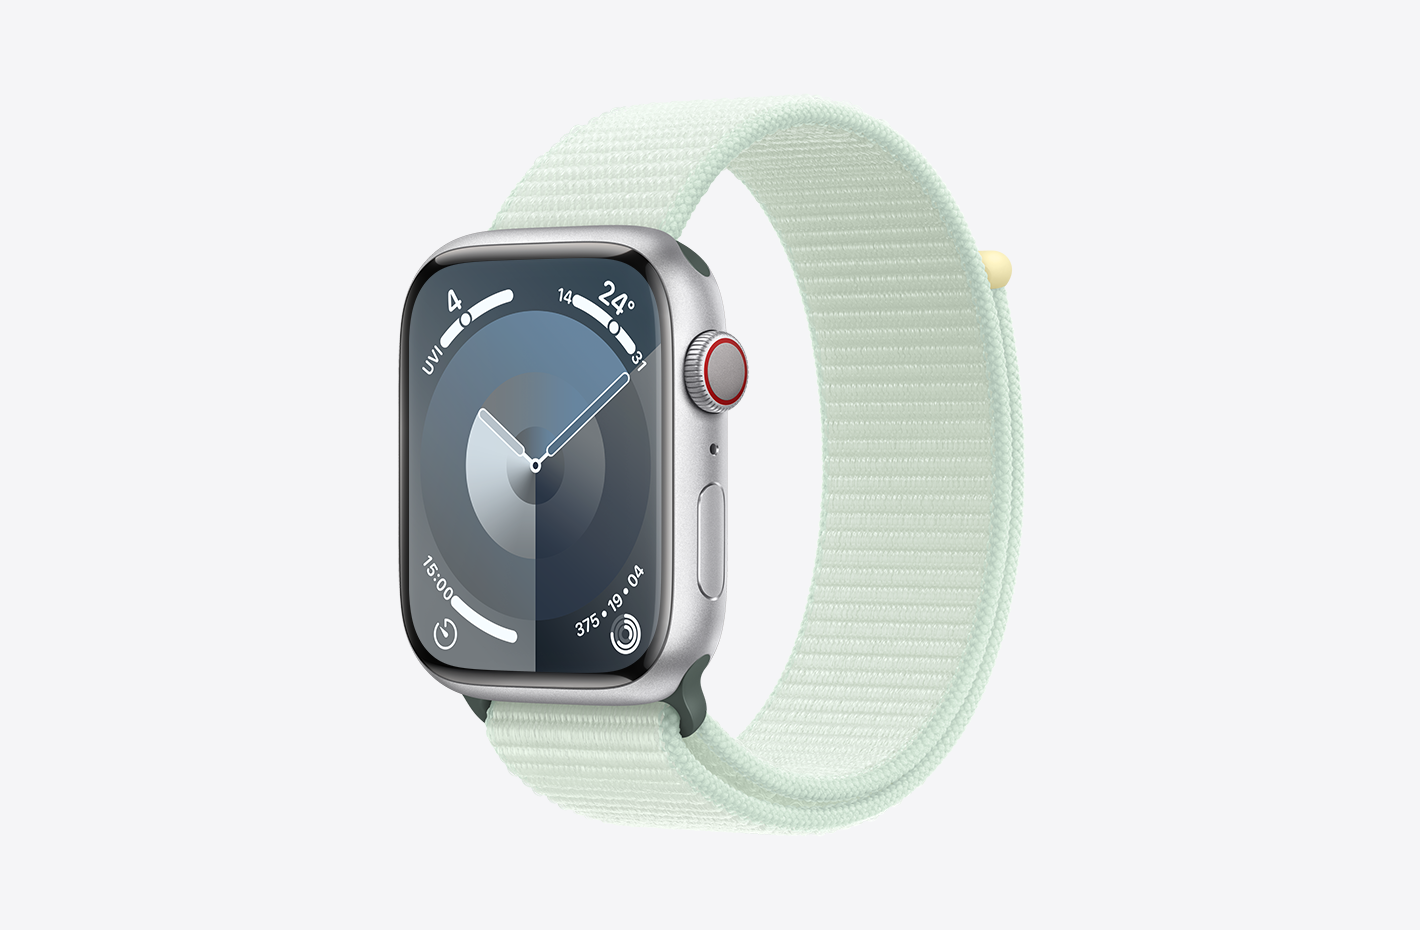 Apple Watch with Silver Aluminium case with matt finish and angled view of Soft Mint (green) Sport Loop, featuring a hook-and-loop fastener and double-layer nylon weave